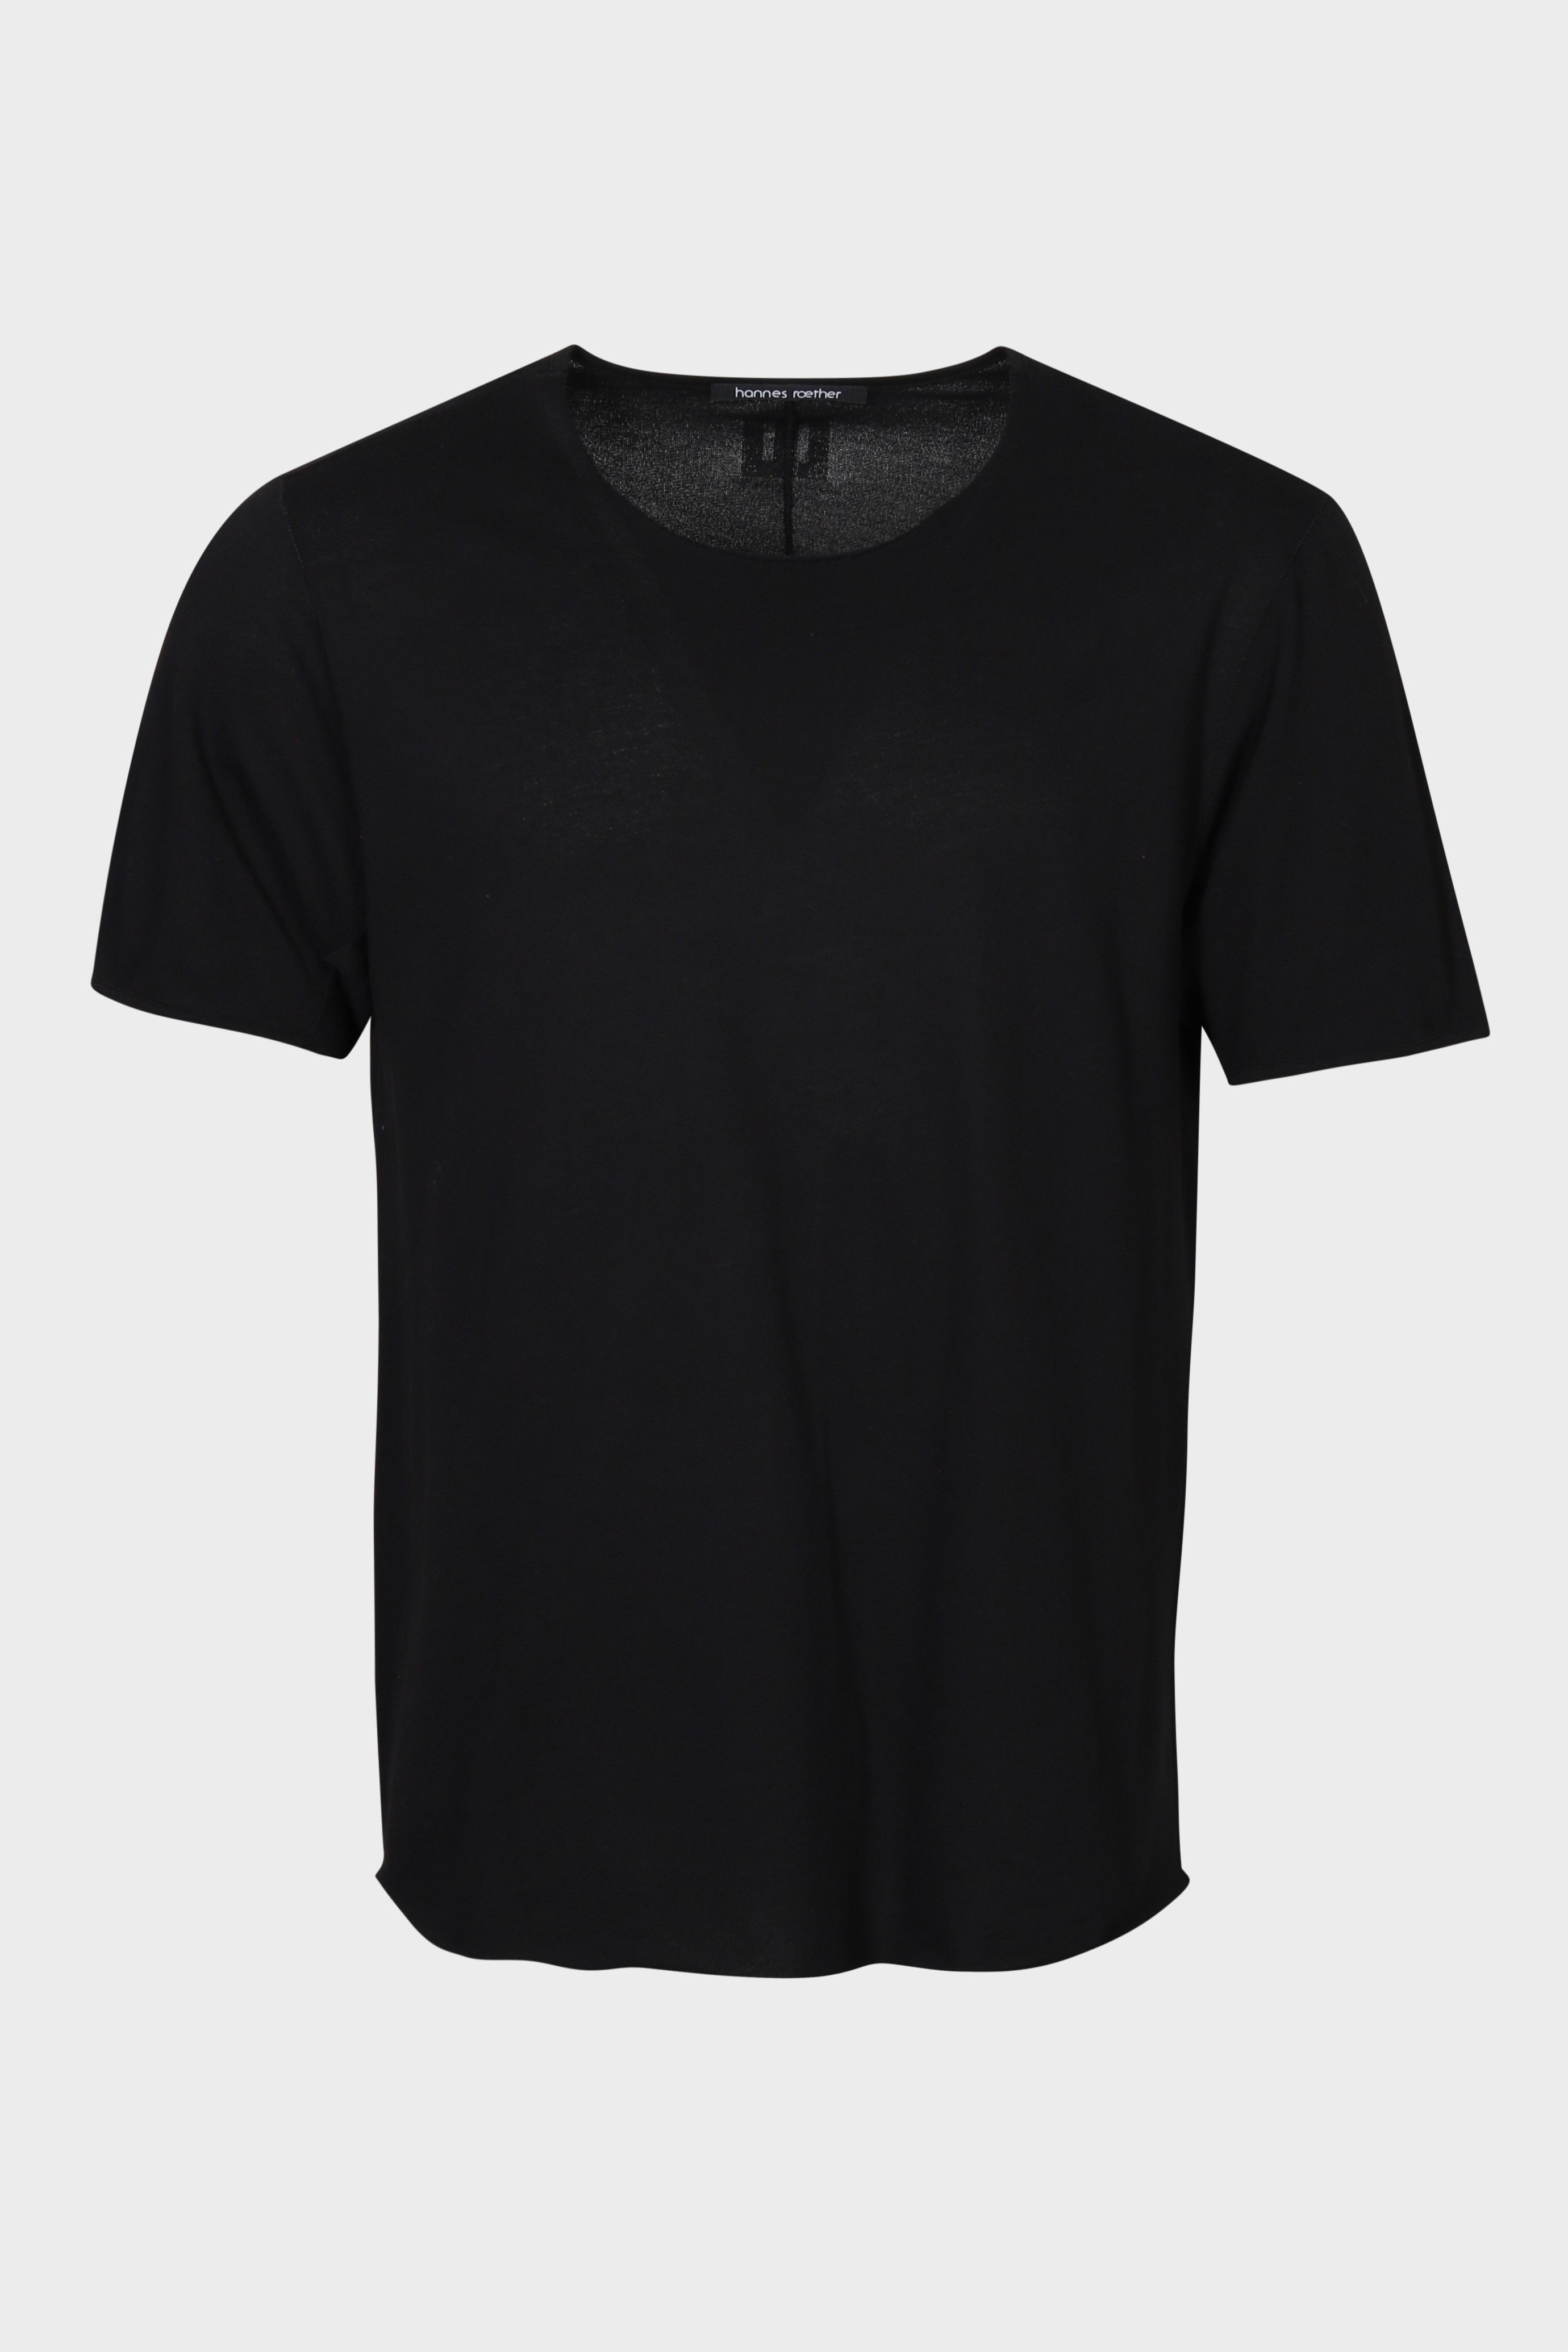 HANNES ROETHER T-Shirt in Black